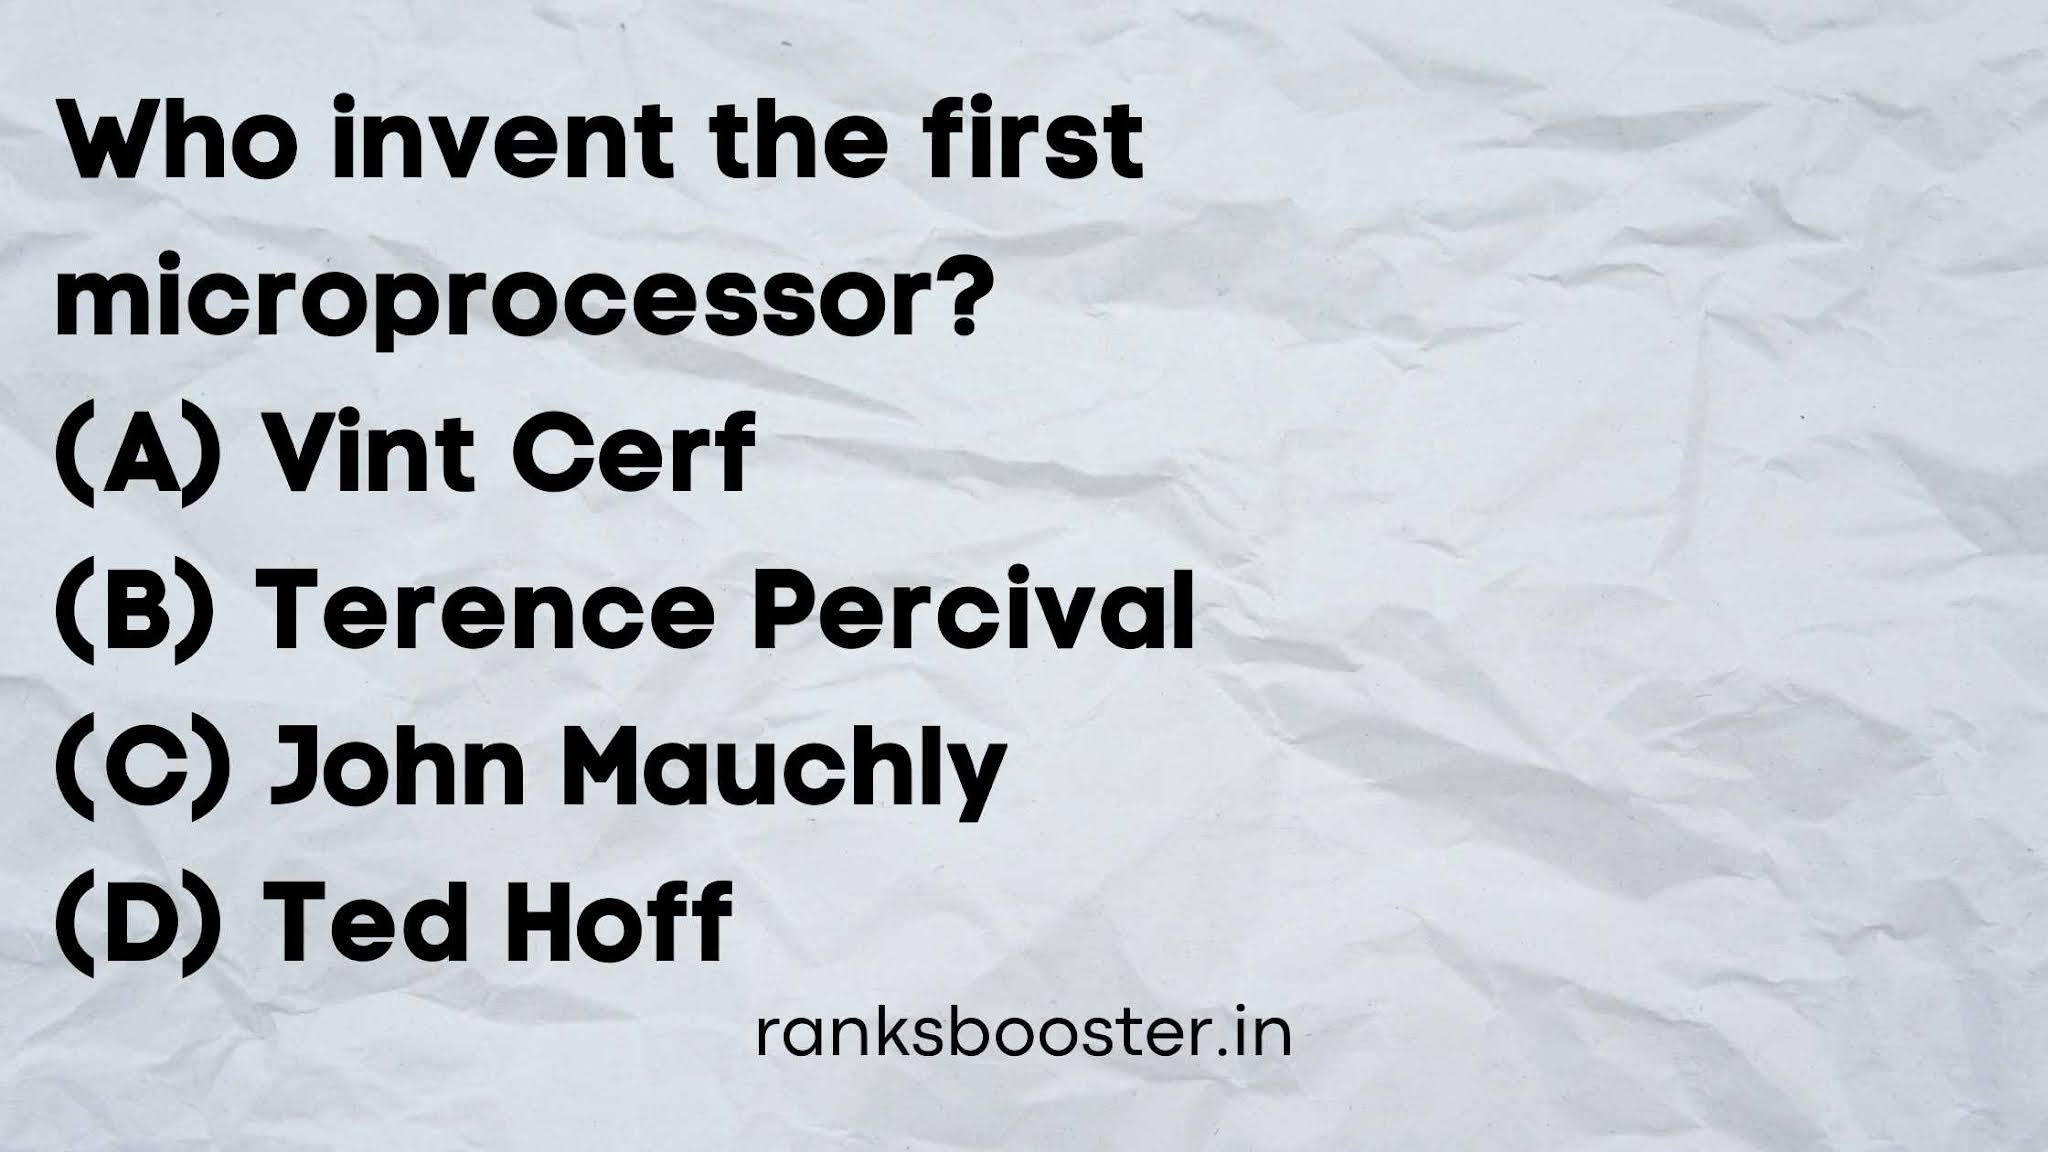 Who invent the first microprocessor? (A) Vint Cerf (B) Terence Percival (C) John Mauchly (D) Ted Hoff